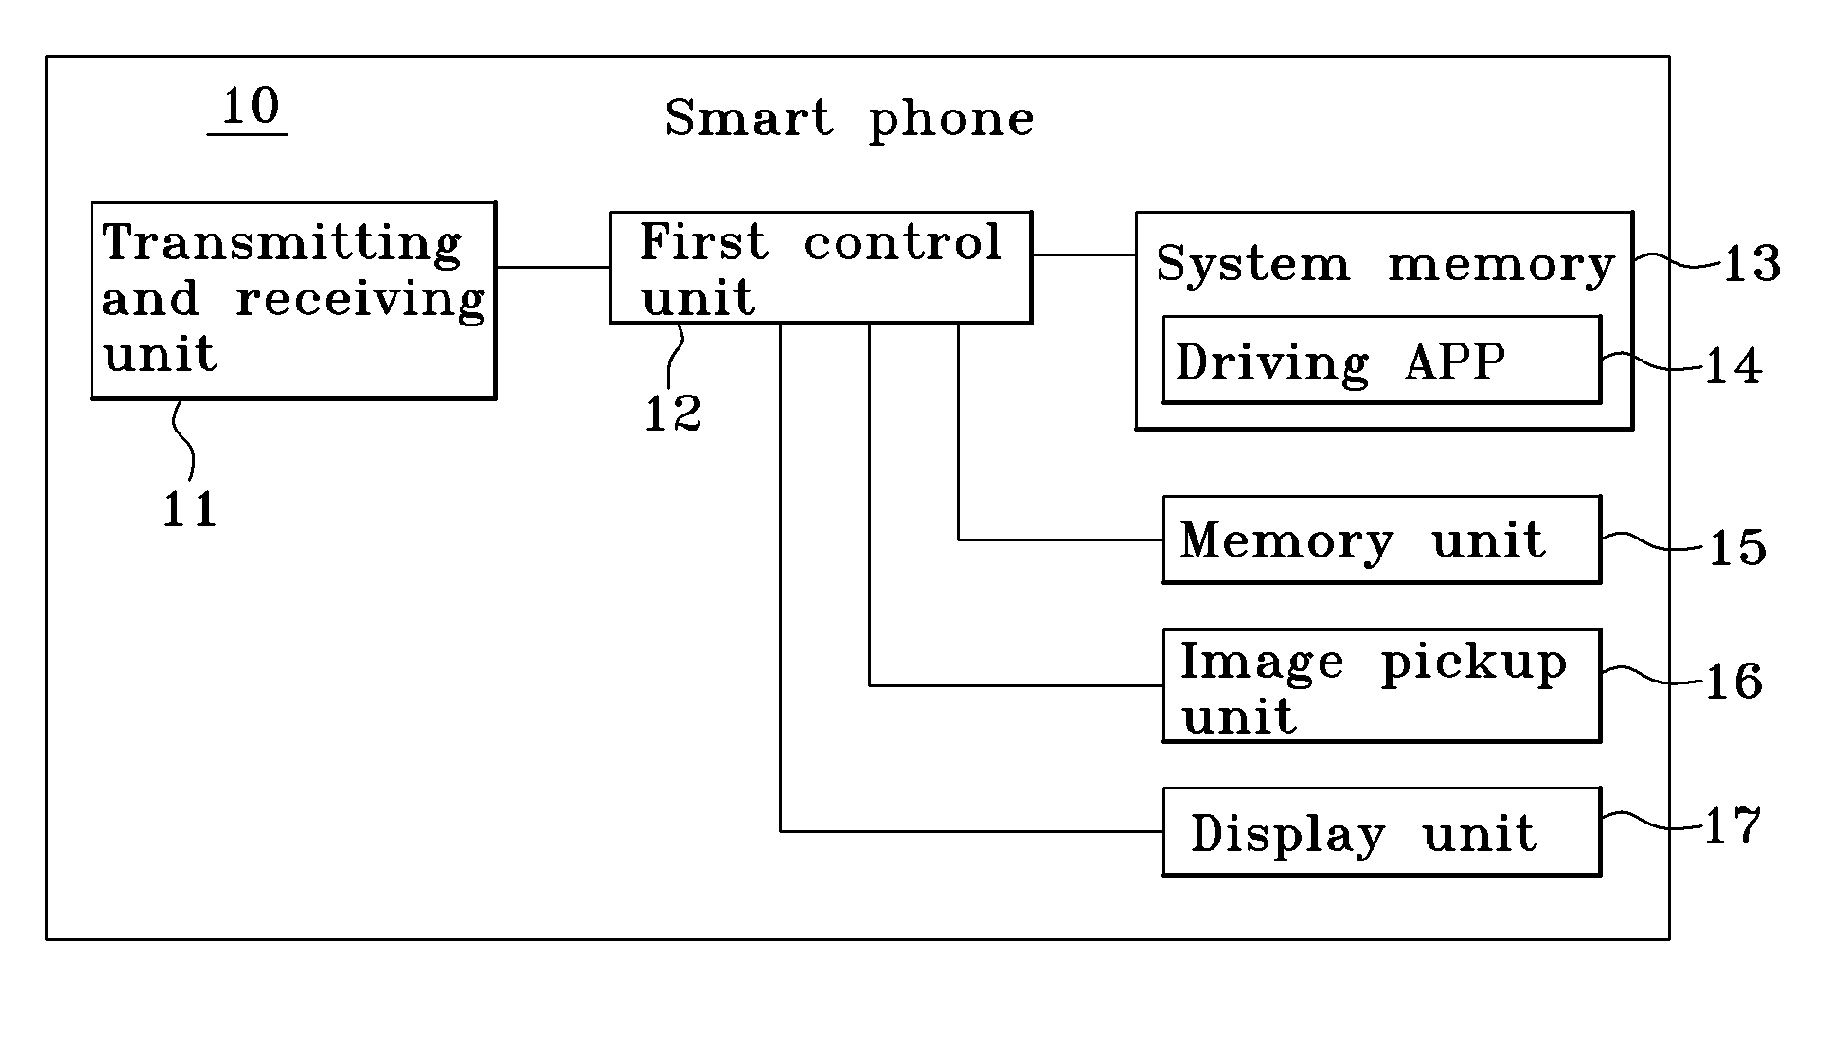 Gas detection system and method using smart phone